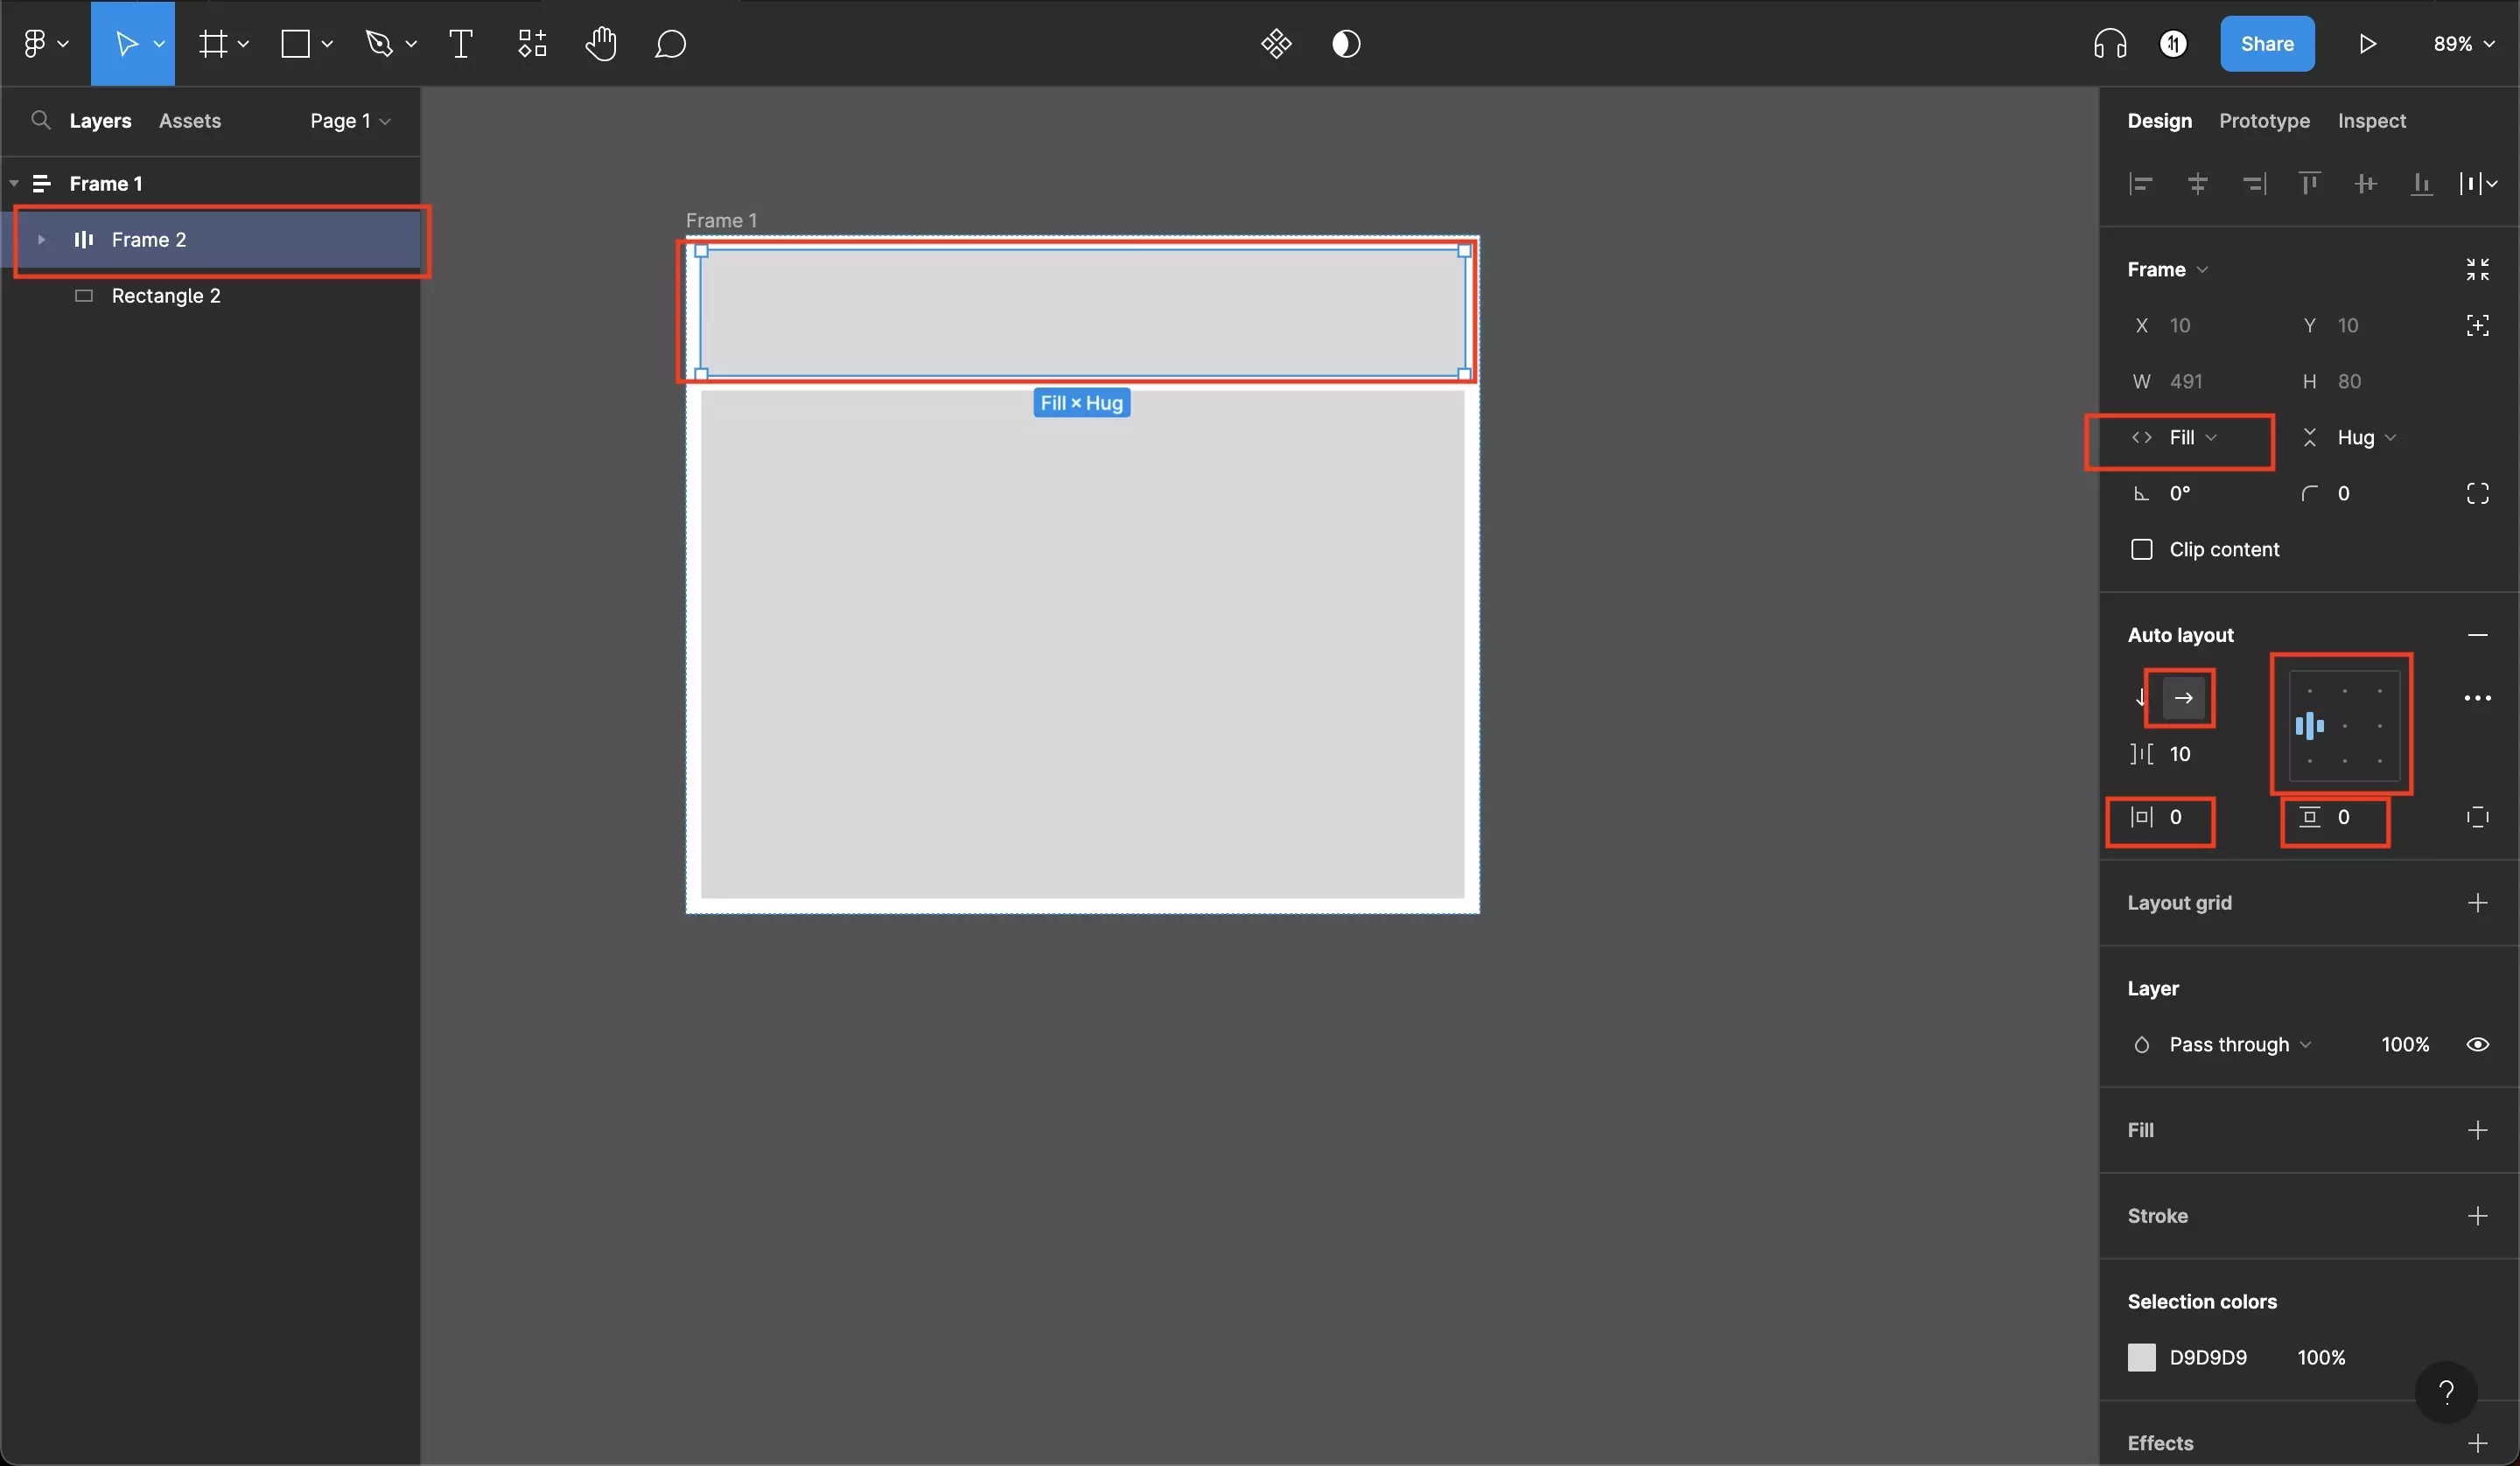 A screenshot of figma showing the top section auto layout along with its properties, which are described below.